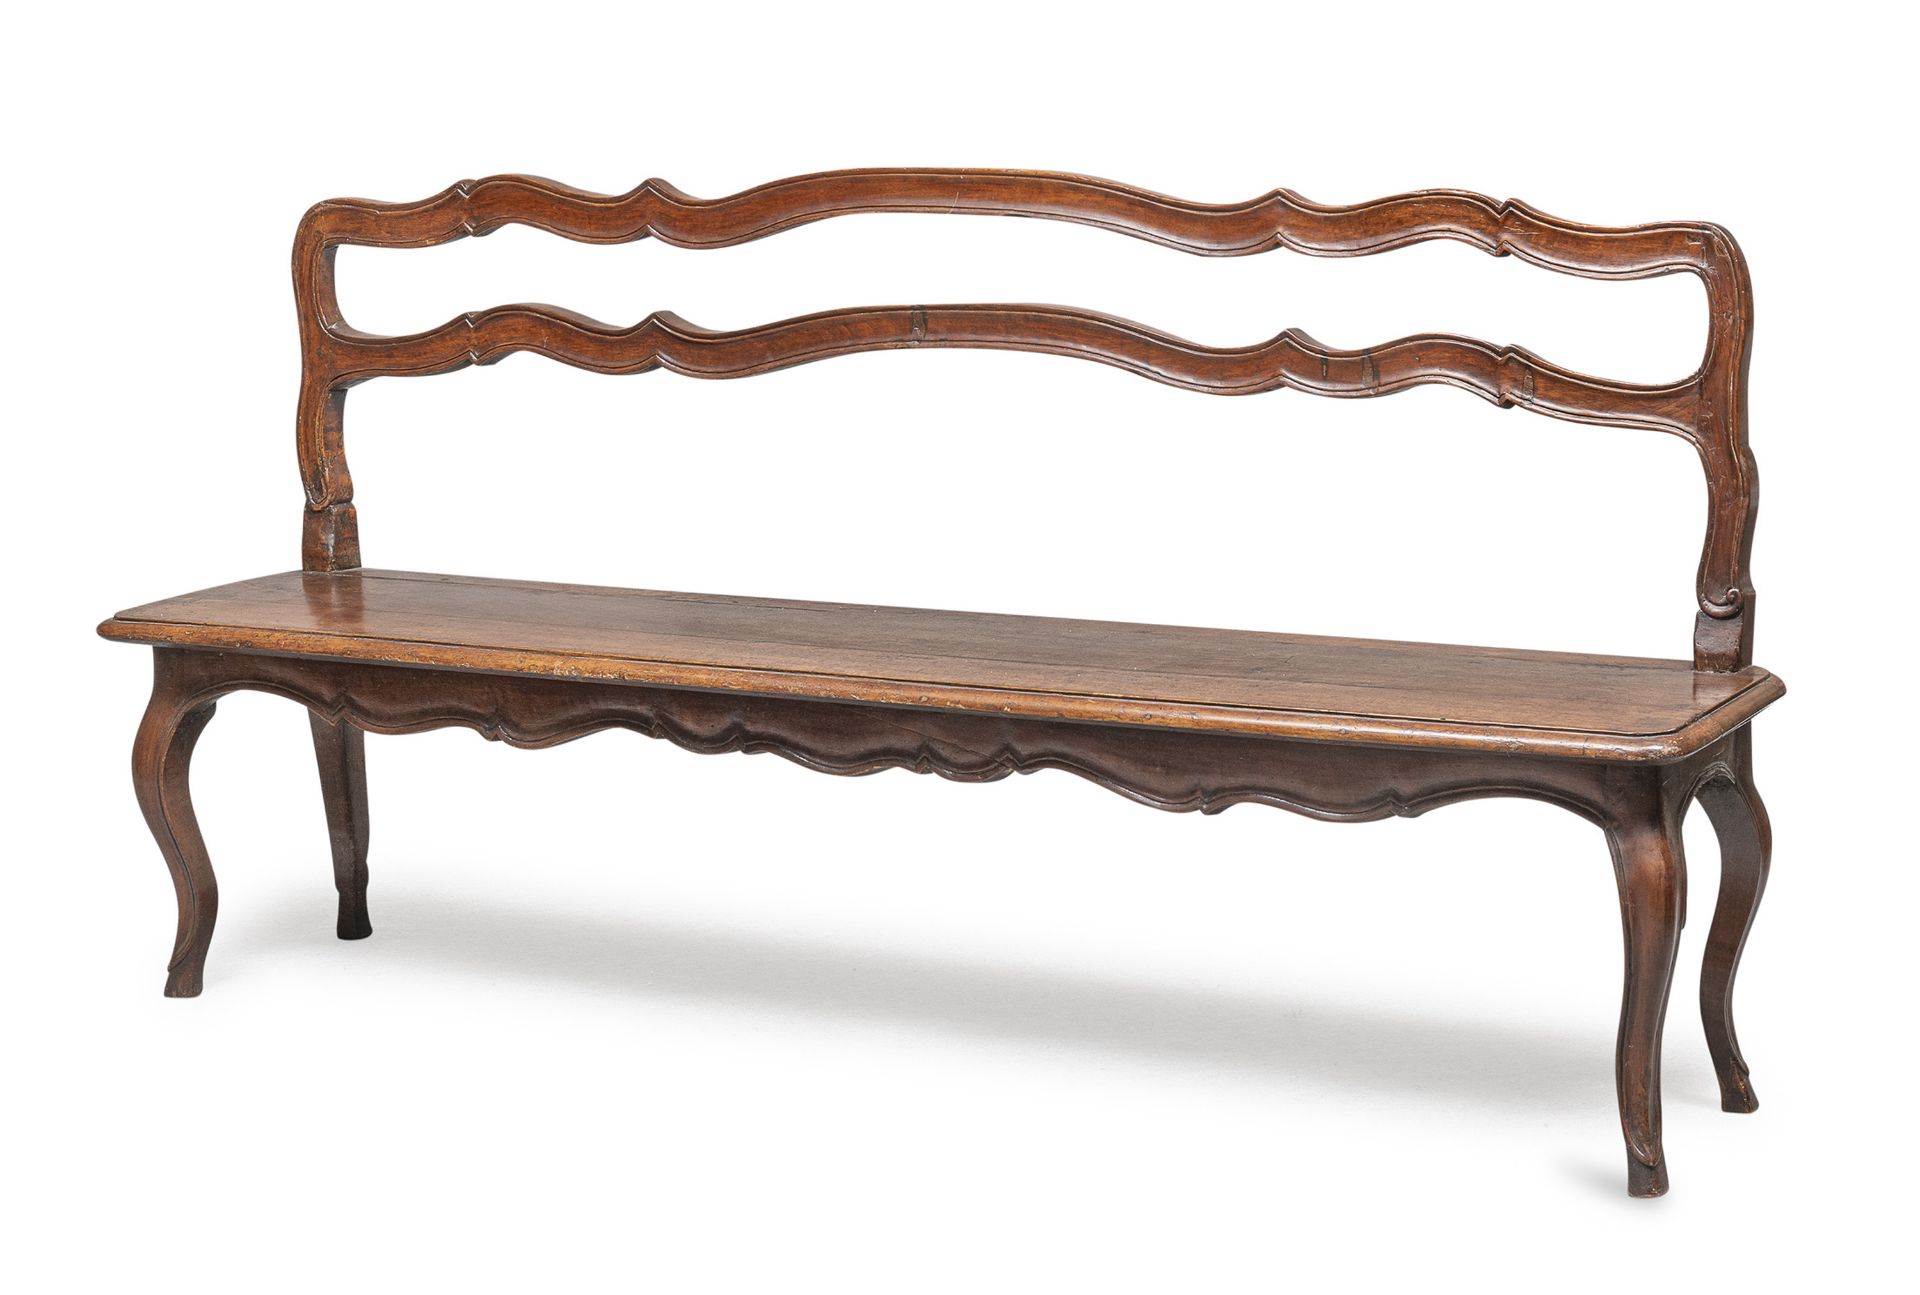 WALNUT BENCH CENTRAL ITALY ANTIQUE ELEMENTS